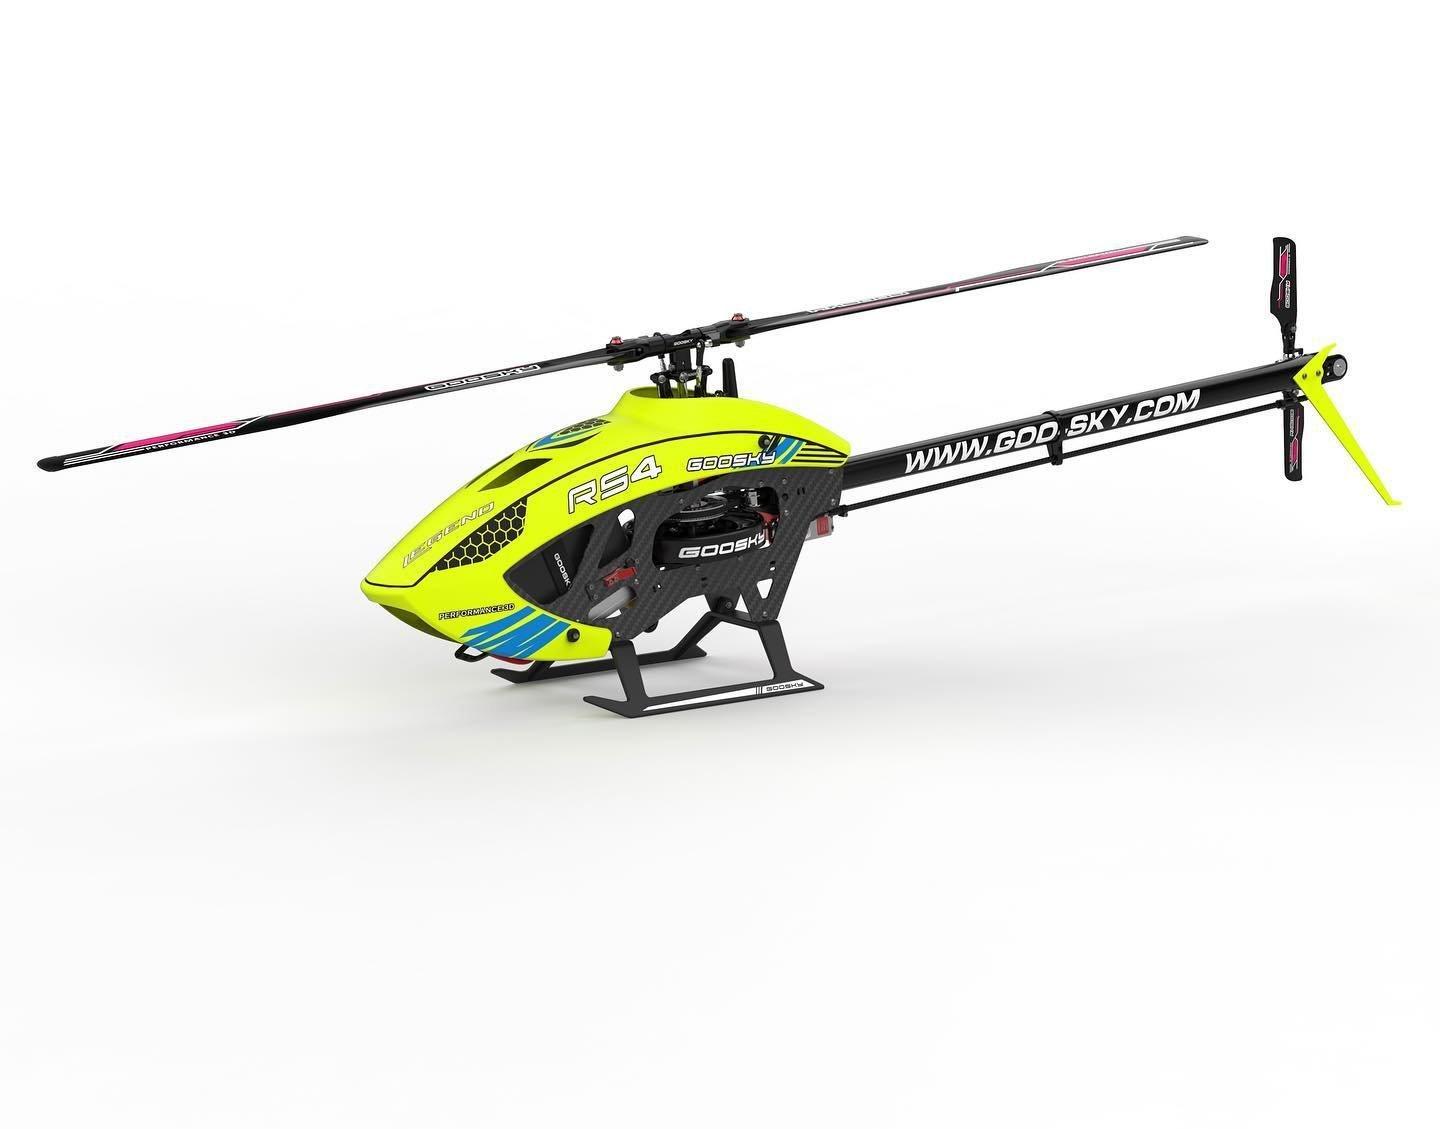 Best Rc Helicopter: Top RC Helicopter Models for All Skill Levels